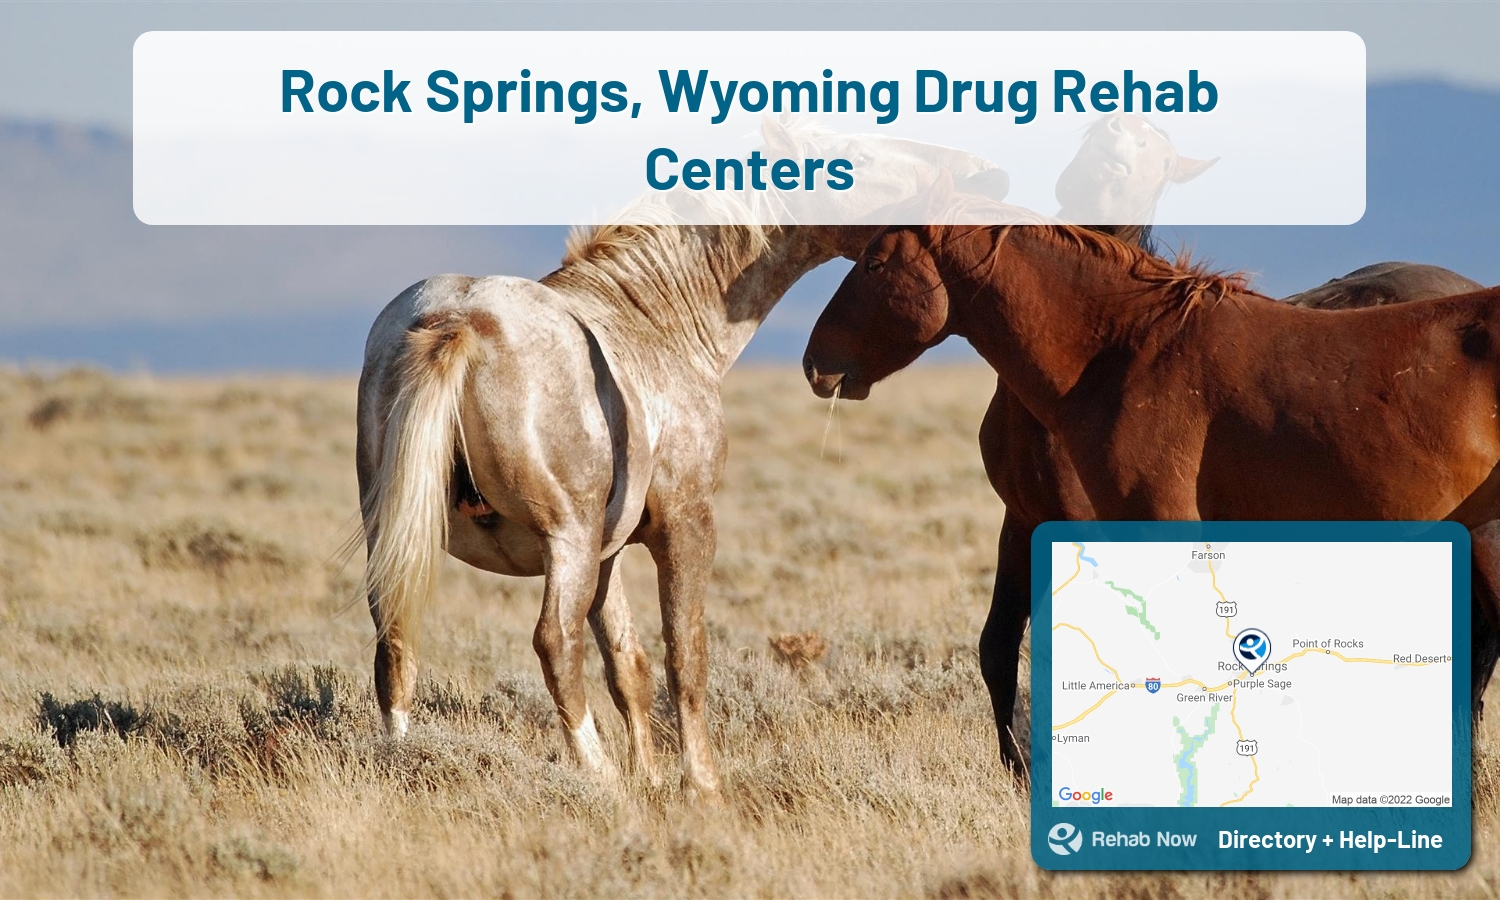 Rock Springs, WY Treatment Centers. Find drug rehab in Rock Springs, Wyoming, or detox and treatment programs. Get the right help now!